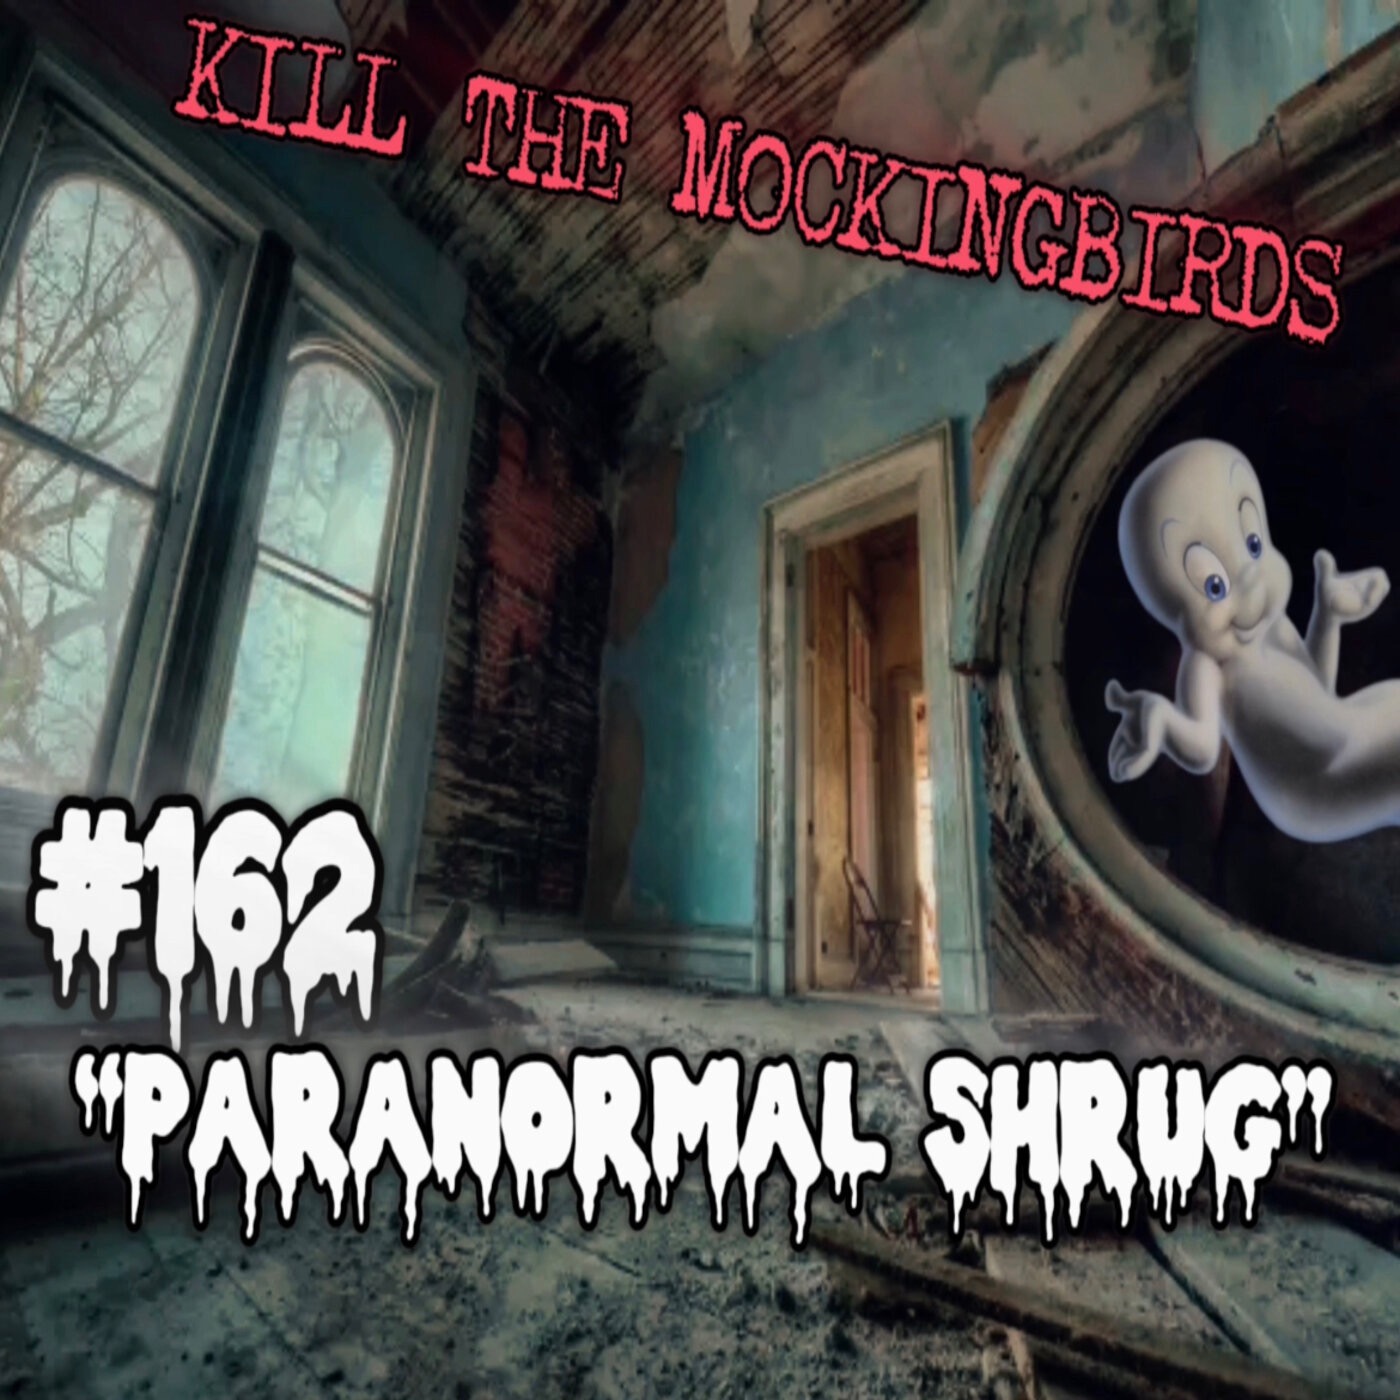 #162 “PARANORMAL SHRUG” W/ CHAZ OF THE DEAD